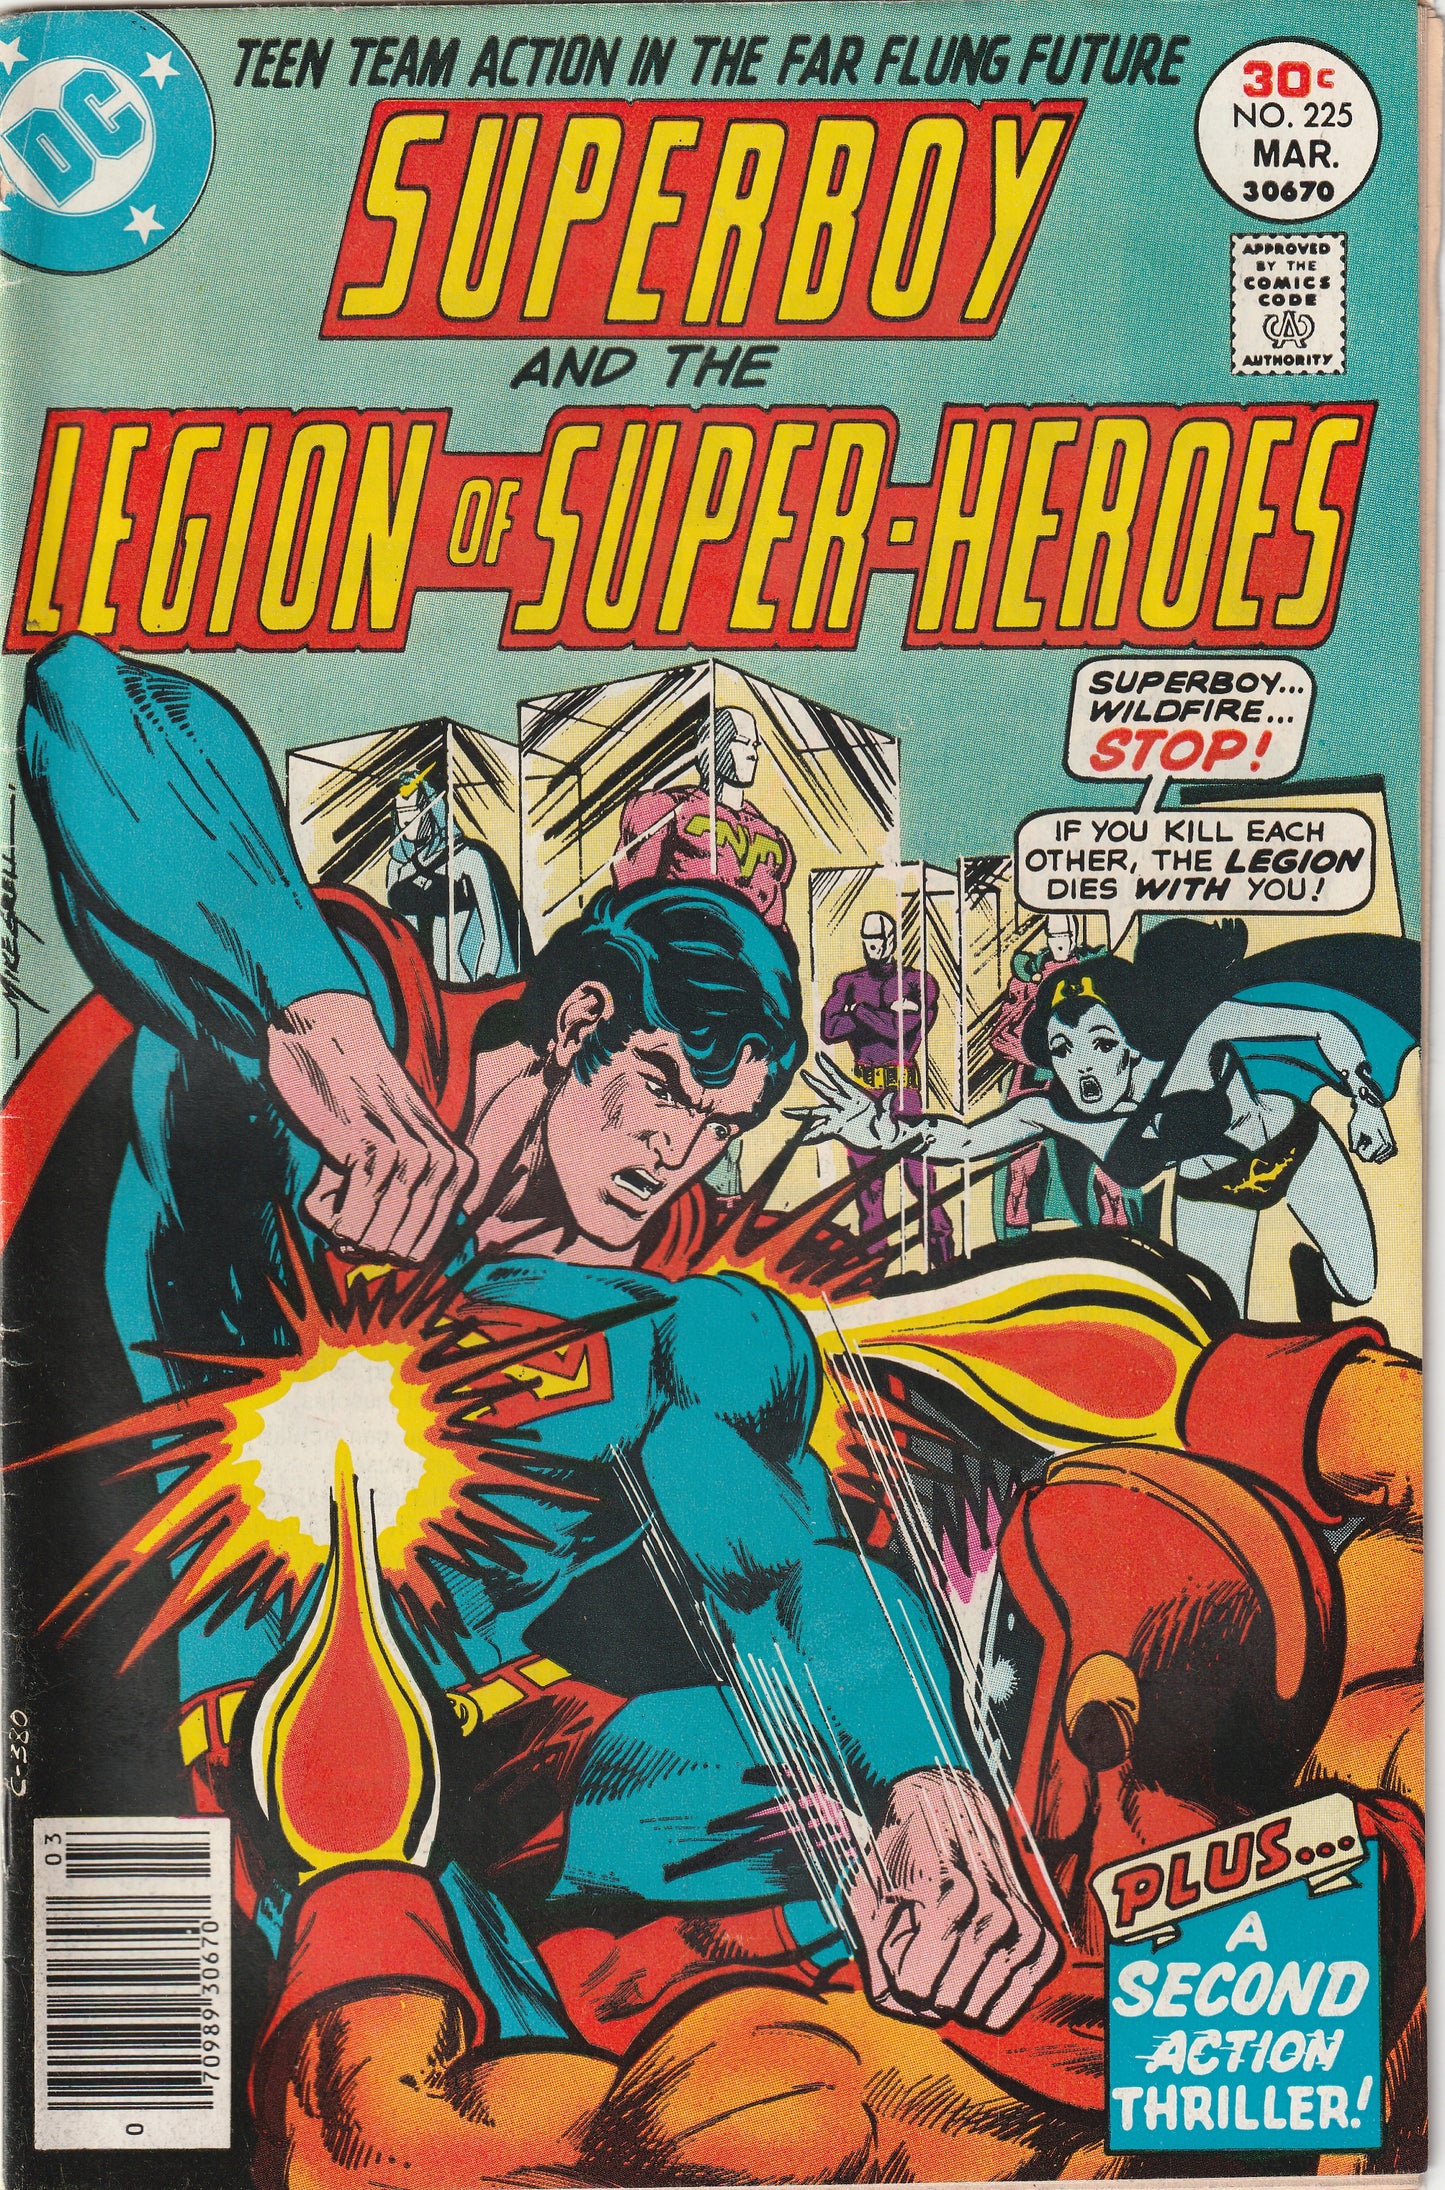 Superboy #225 (1977) - Starring the Legion of Super-Heroes